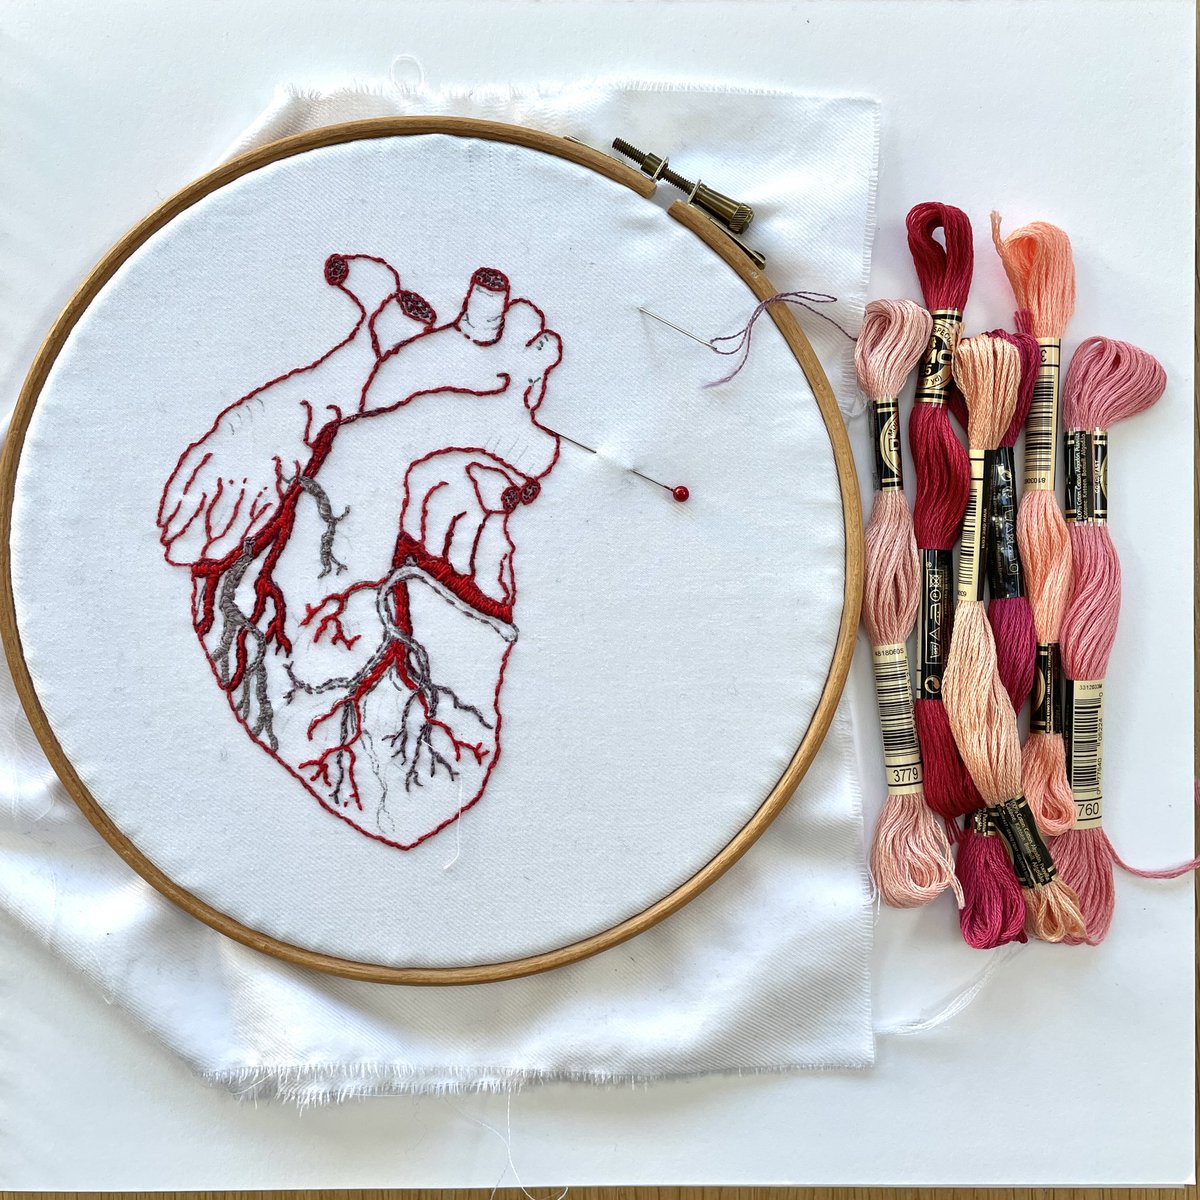 Art from the Heart
Work in Progress 
#slowstitching#sciarts